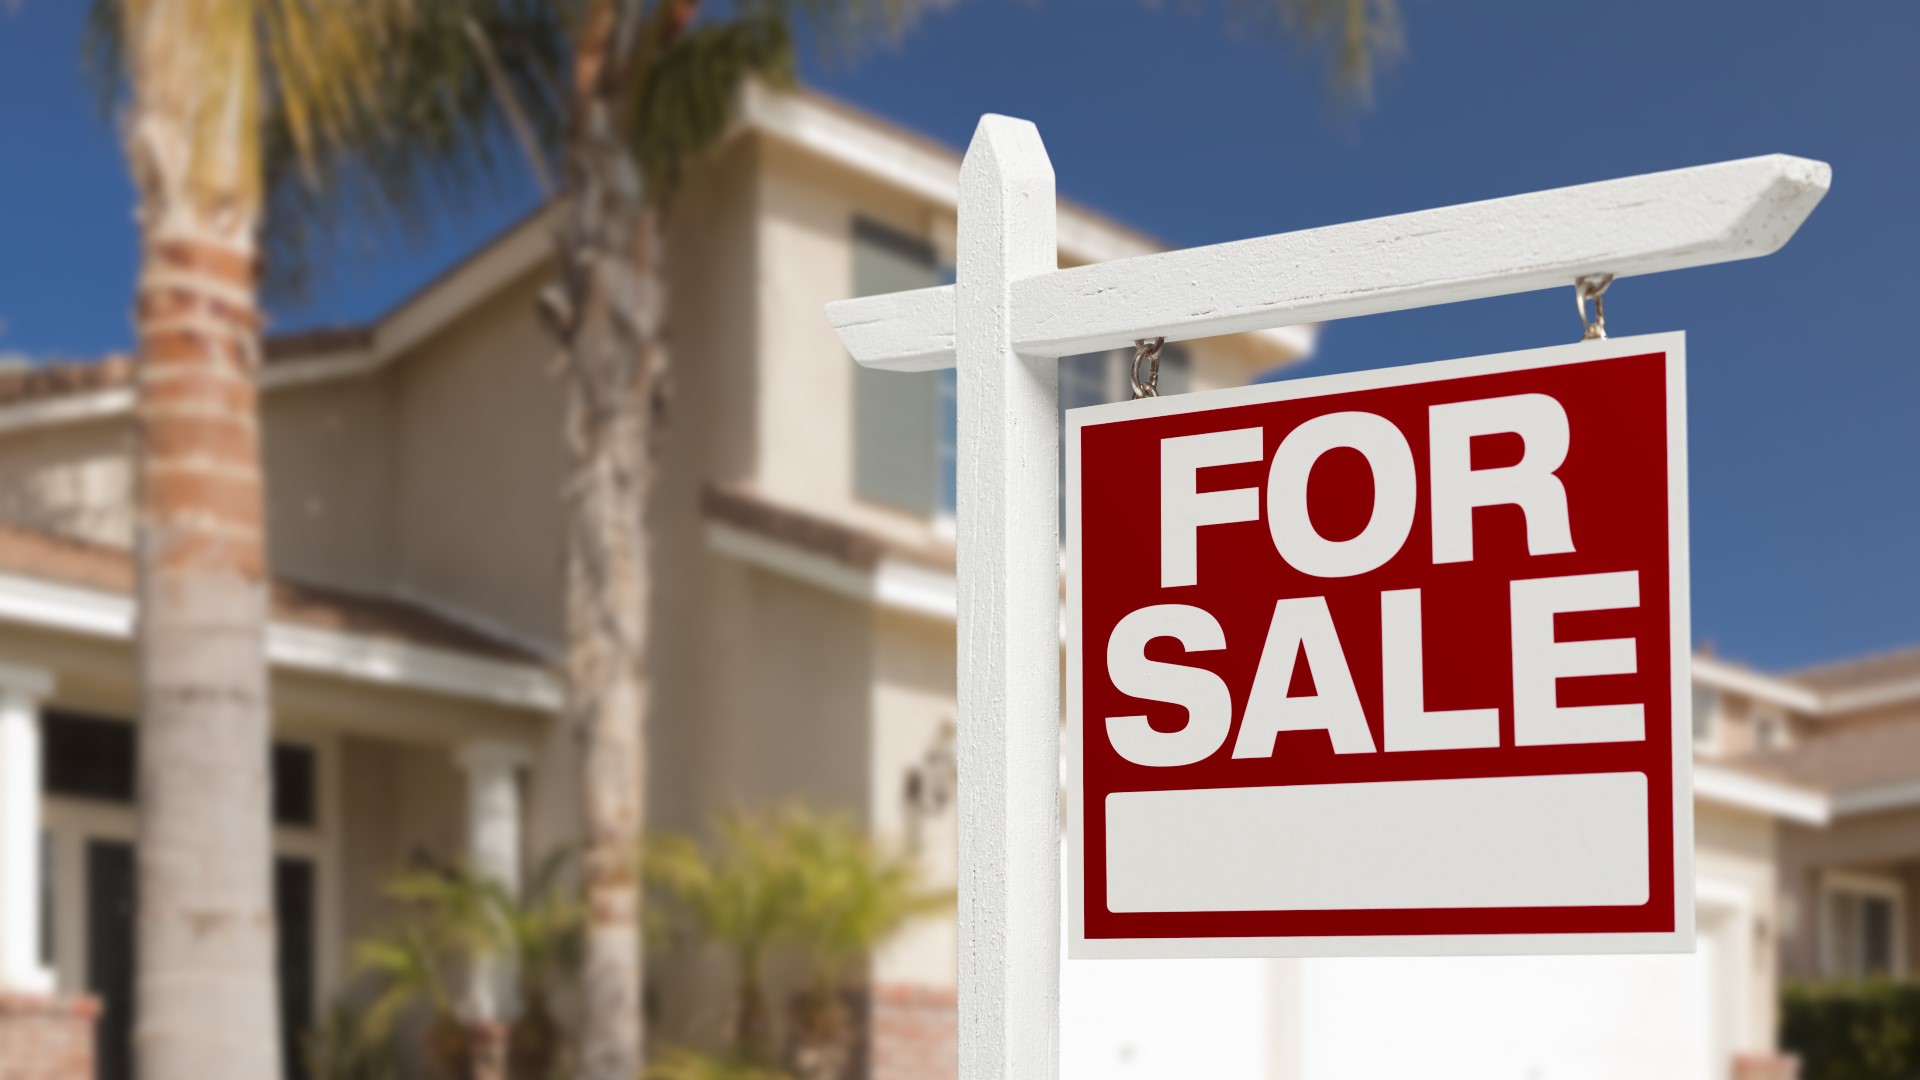 The 2021 real estate market in Arizona is being fueled by incredible demand with limited supply. But how long will this last?